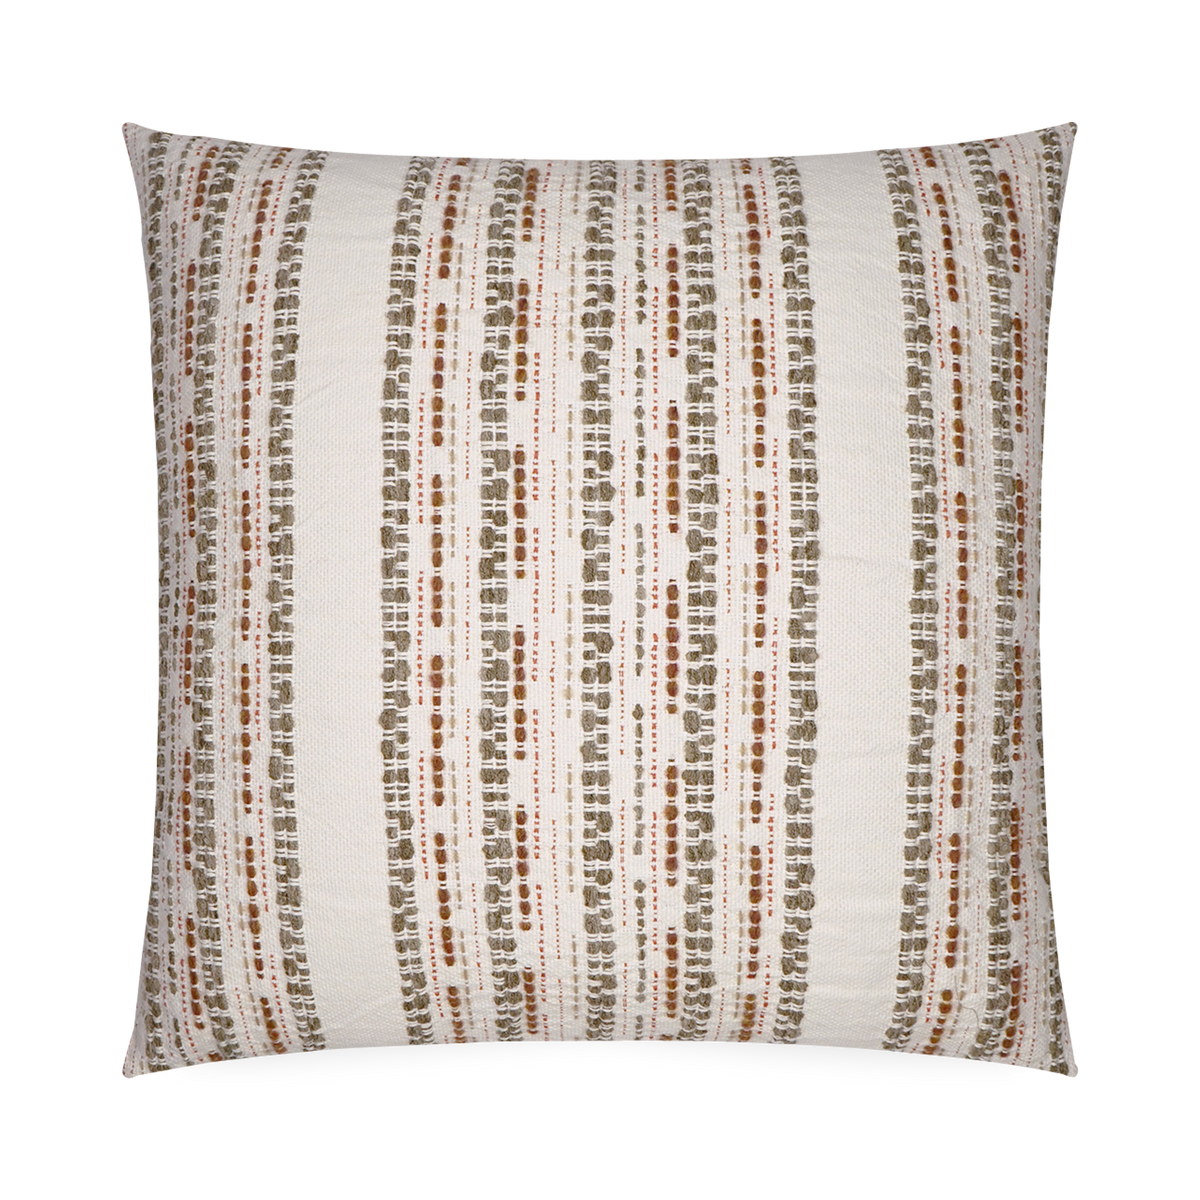 With a focus on artisan weaving with sustainable repurposed fabrics, the Adira Pillow is carefully handcrafted and expresses itself with a contrasting thick boucle weave along with